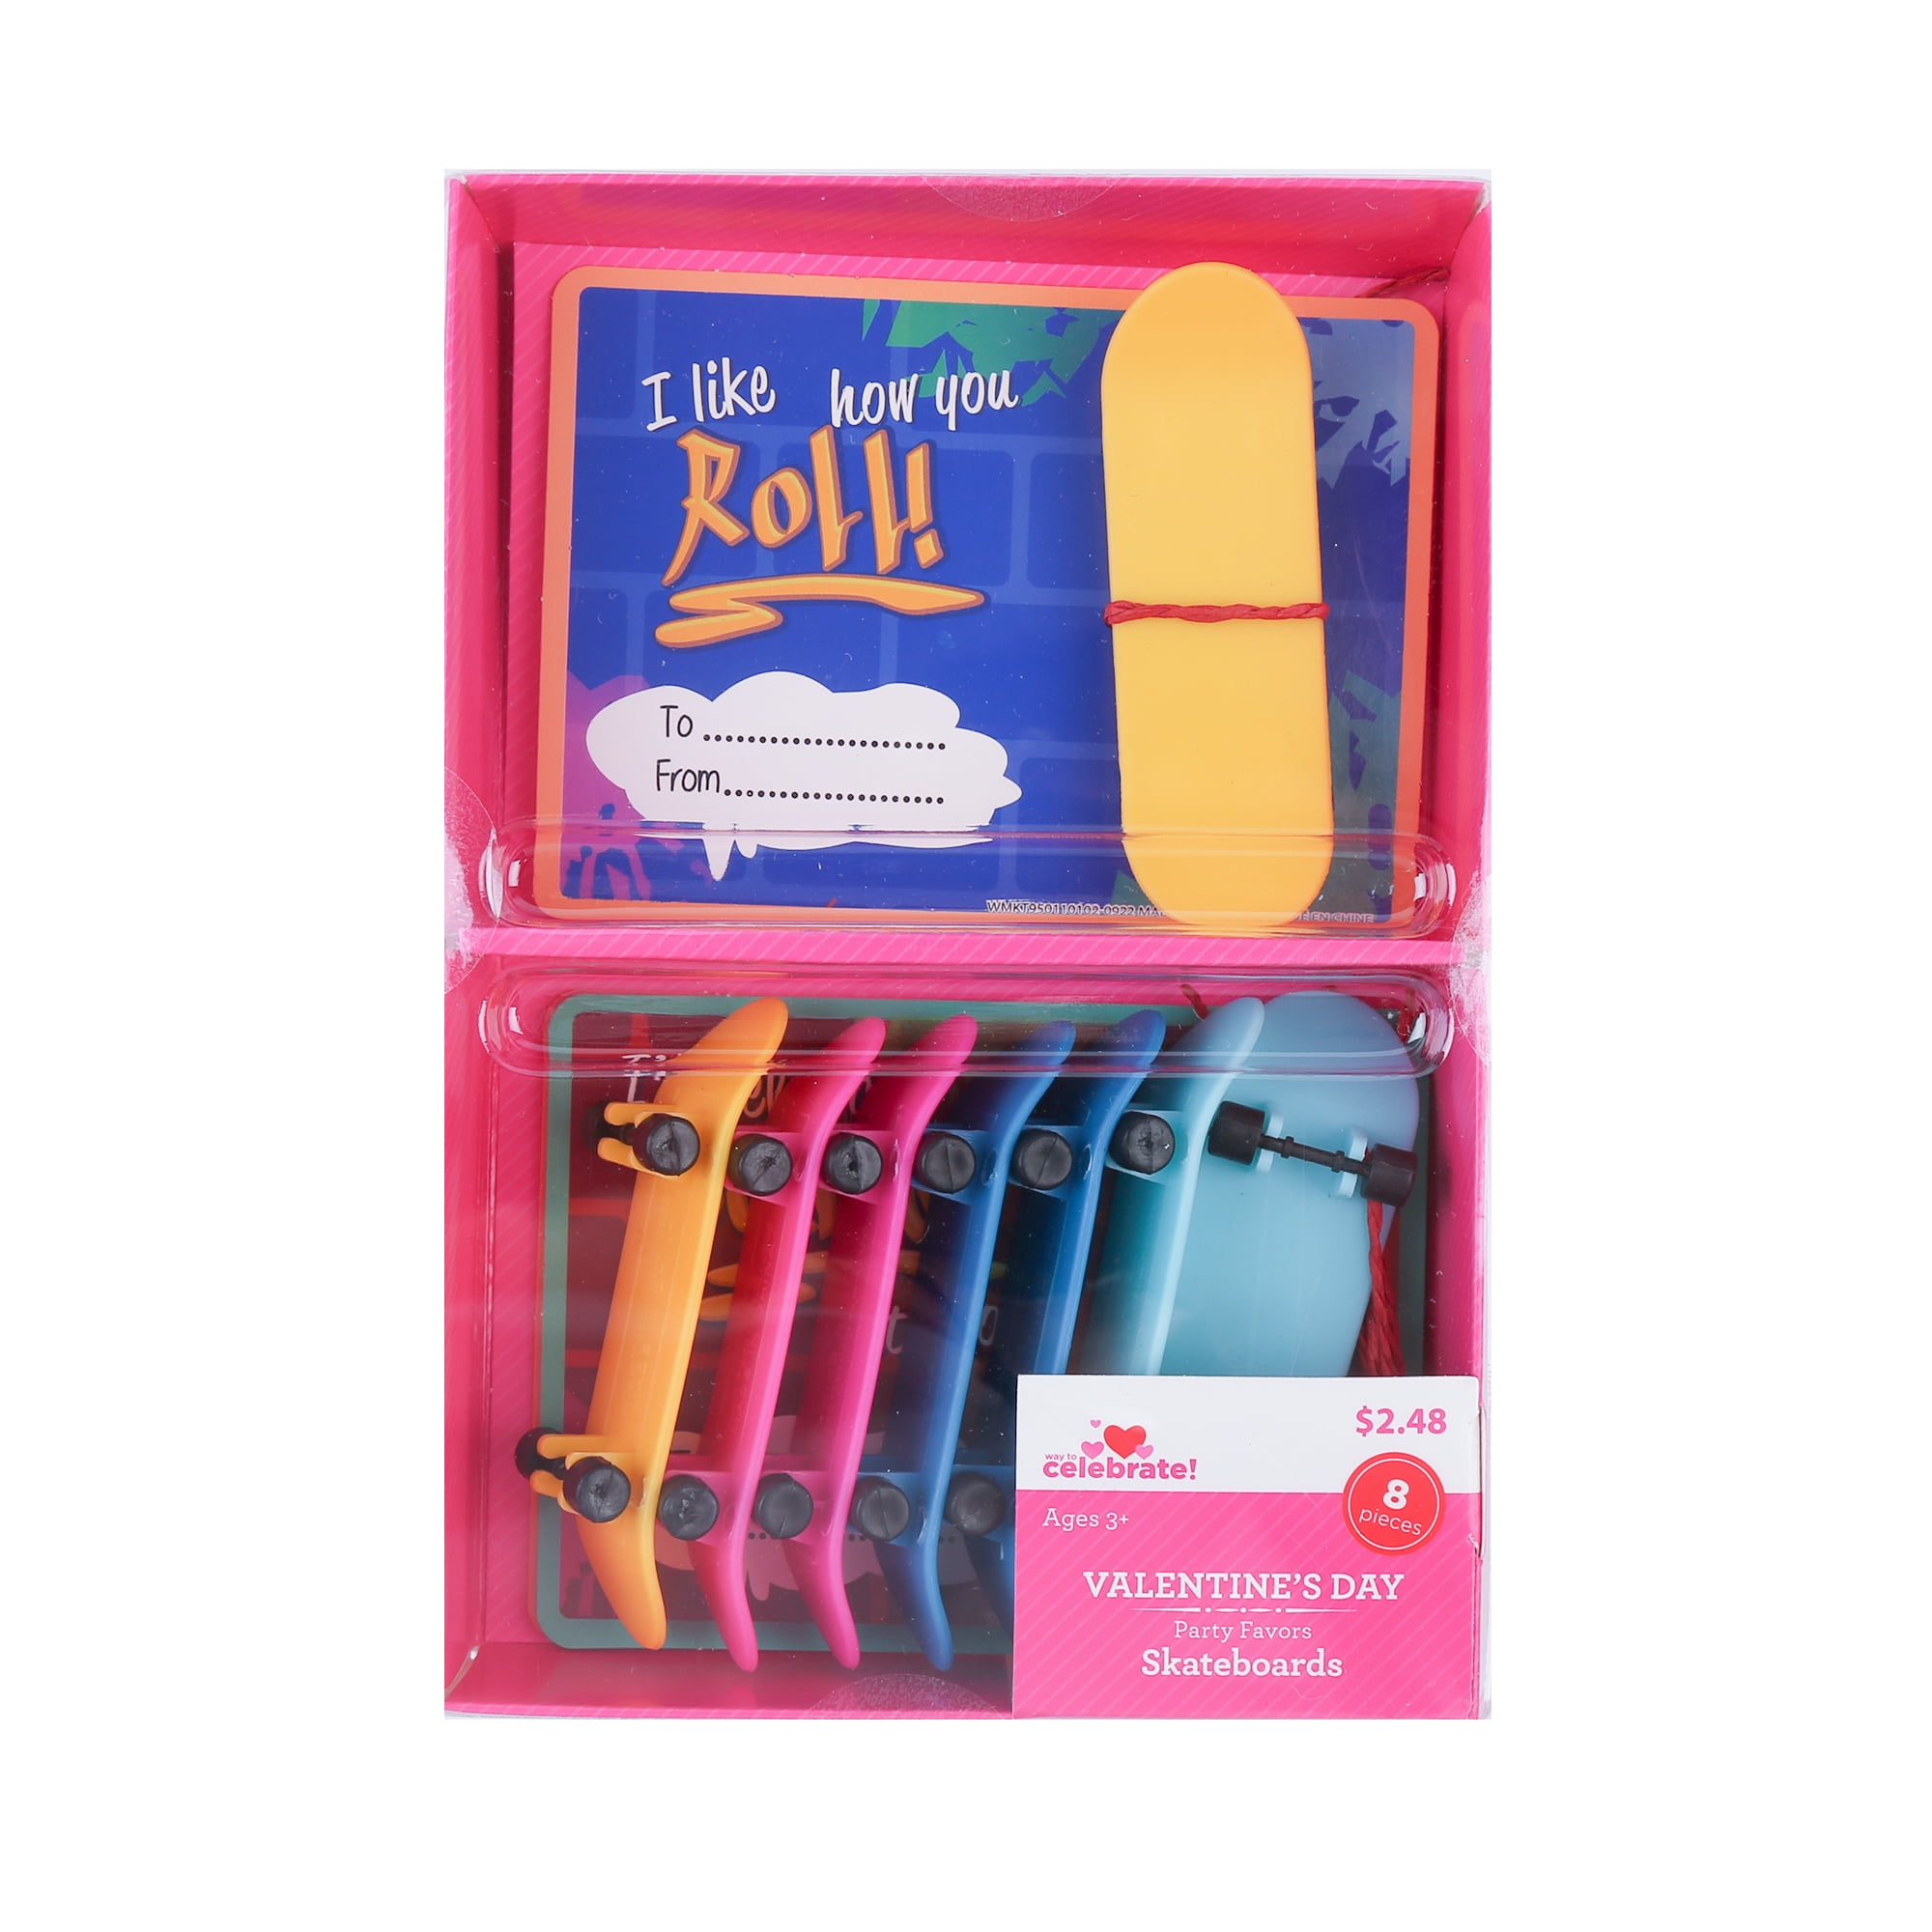 WAY TO CELEBRATE! Way to Celebrate 8 Skateboard, Party Favors, 8 Count. Pink, Yellow, Blue and Teal Color. Plastic